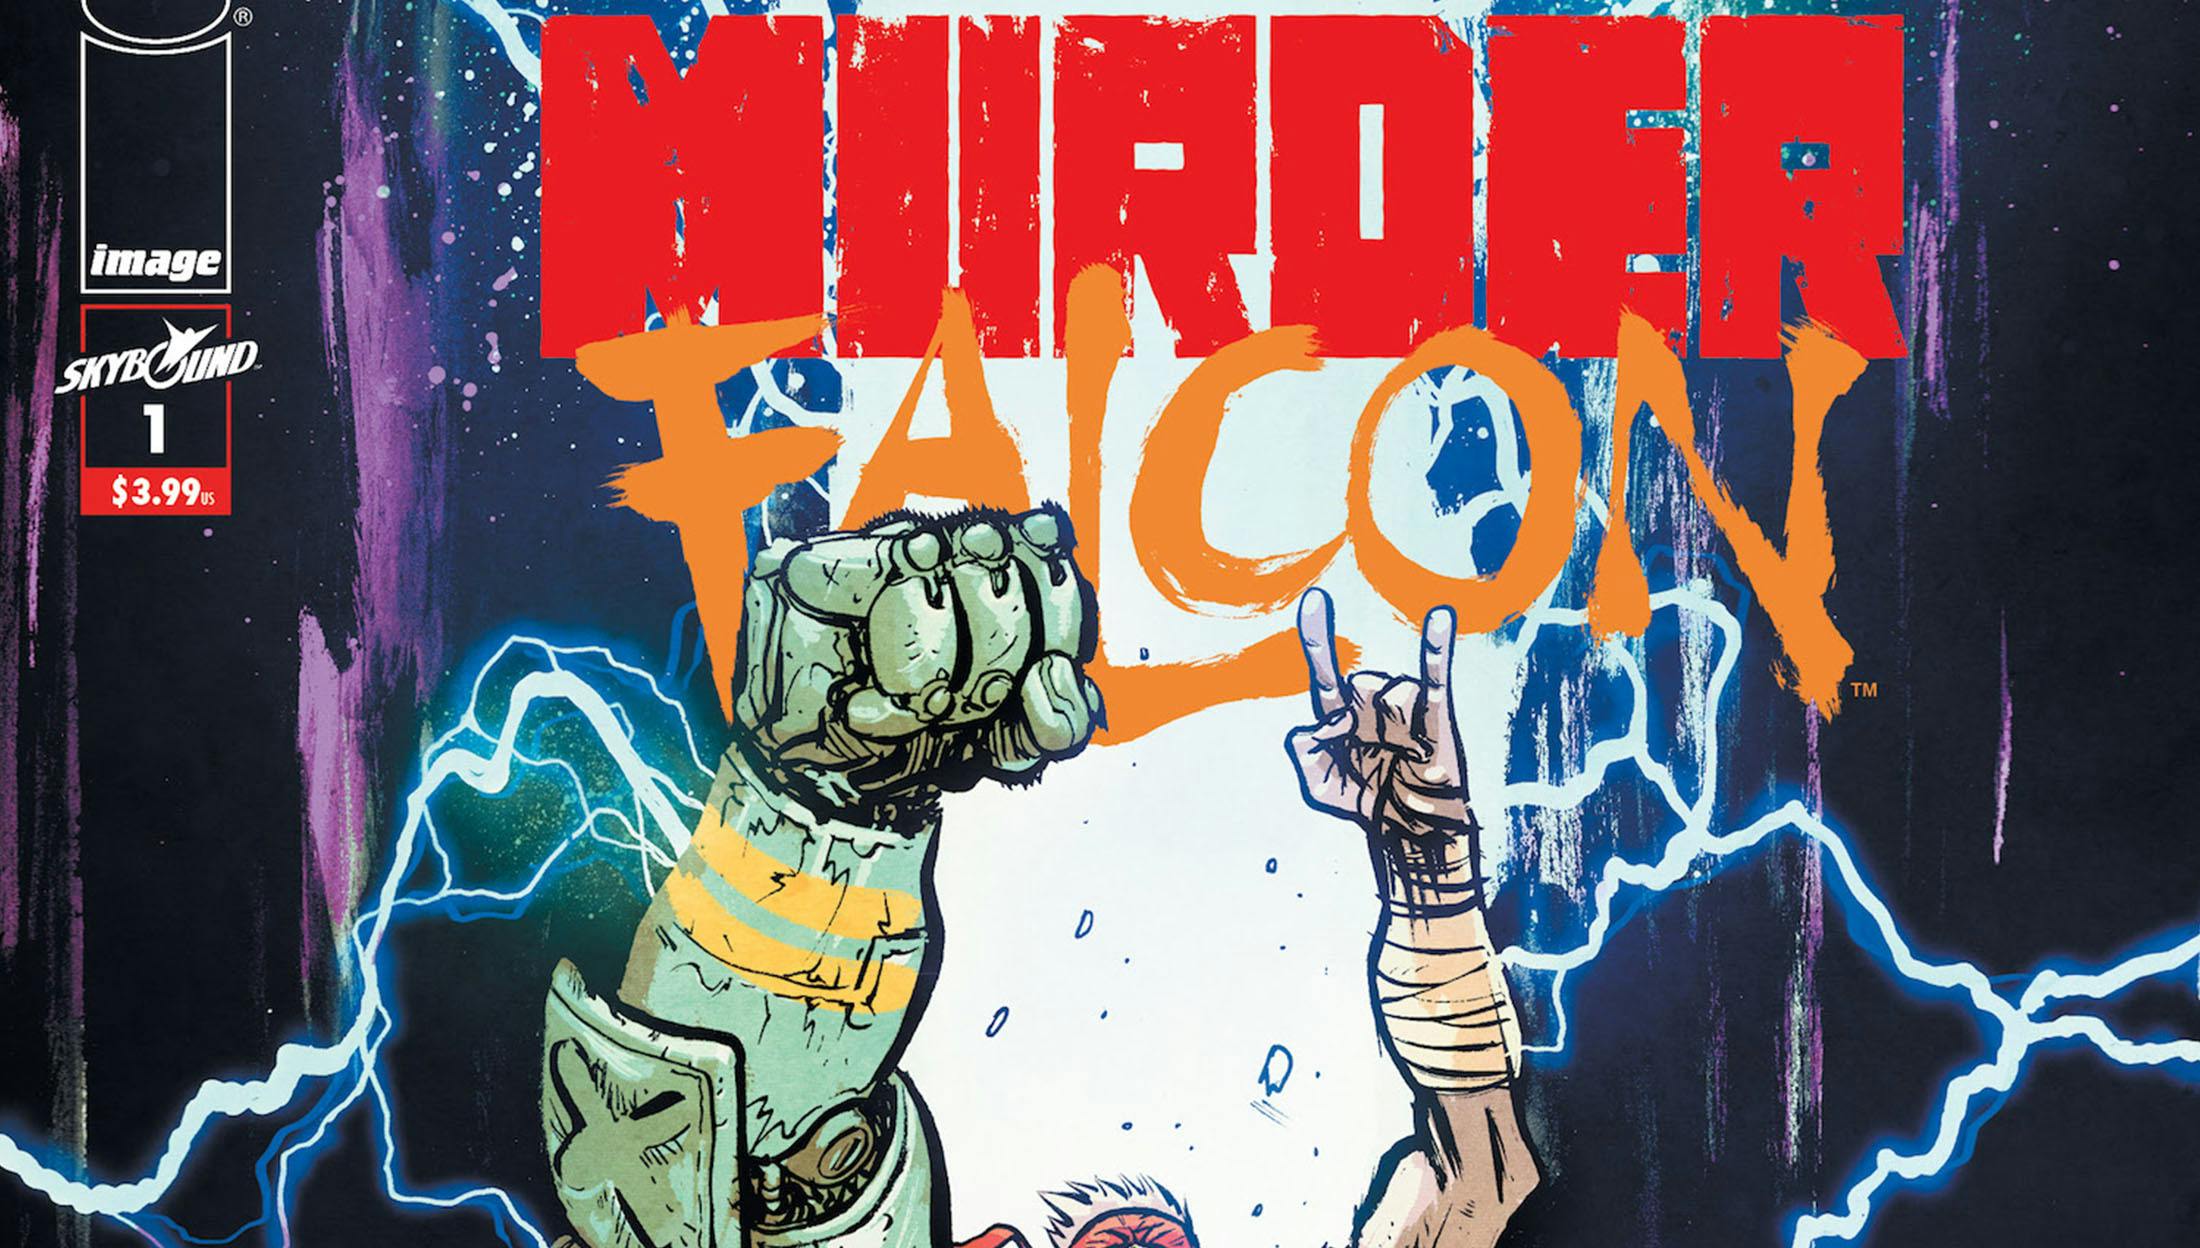 This Comic Book Is About A Metal Guitarist Who Shreds To Summon A Monster-Fighting Falcon Cyborg